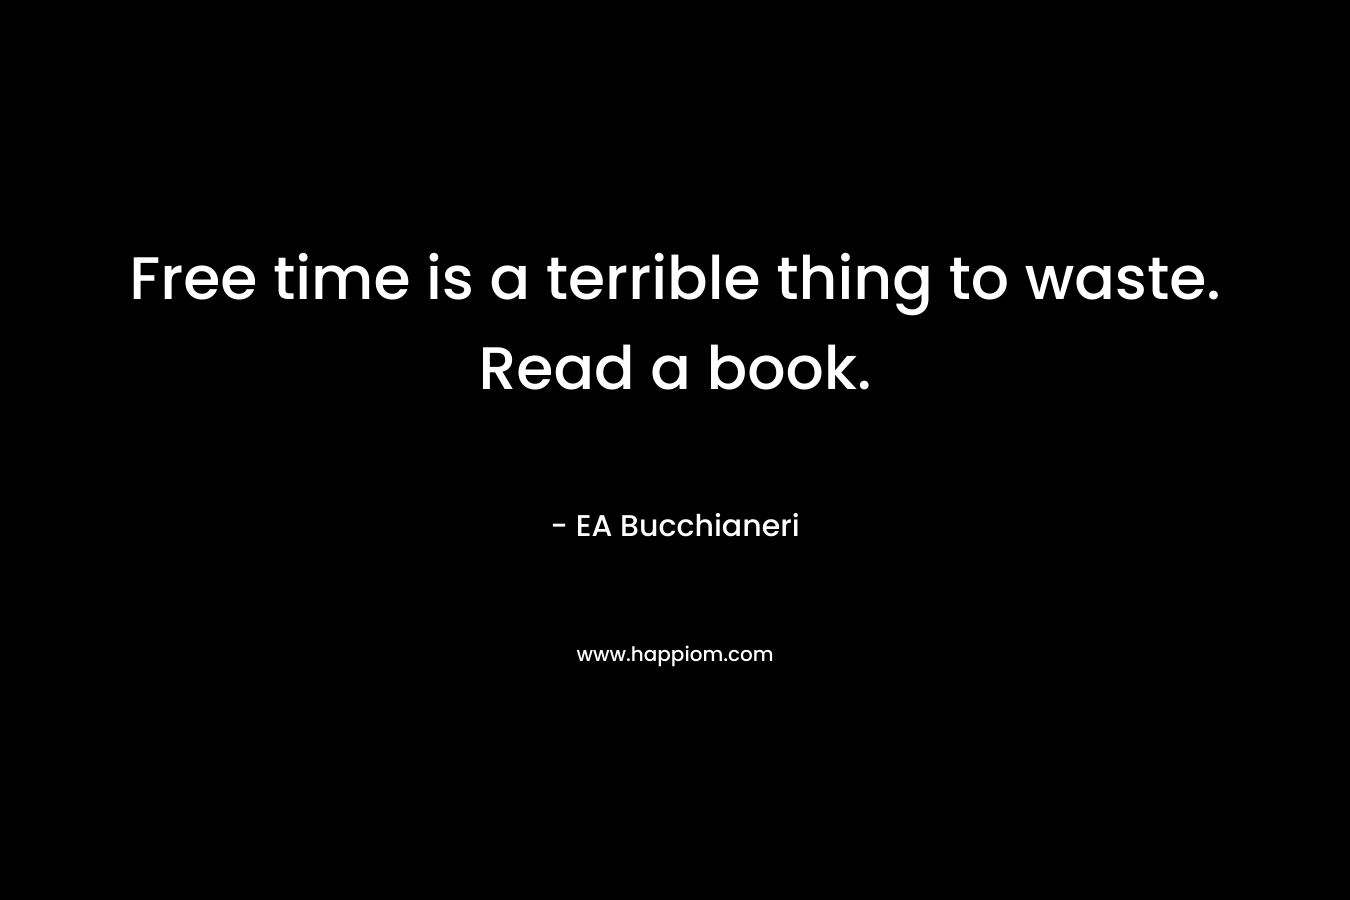 Free time is a terrible thing to waste. Read a book.